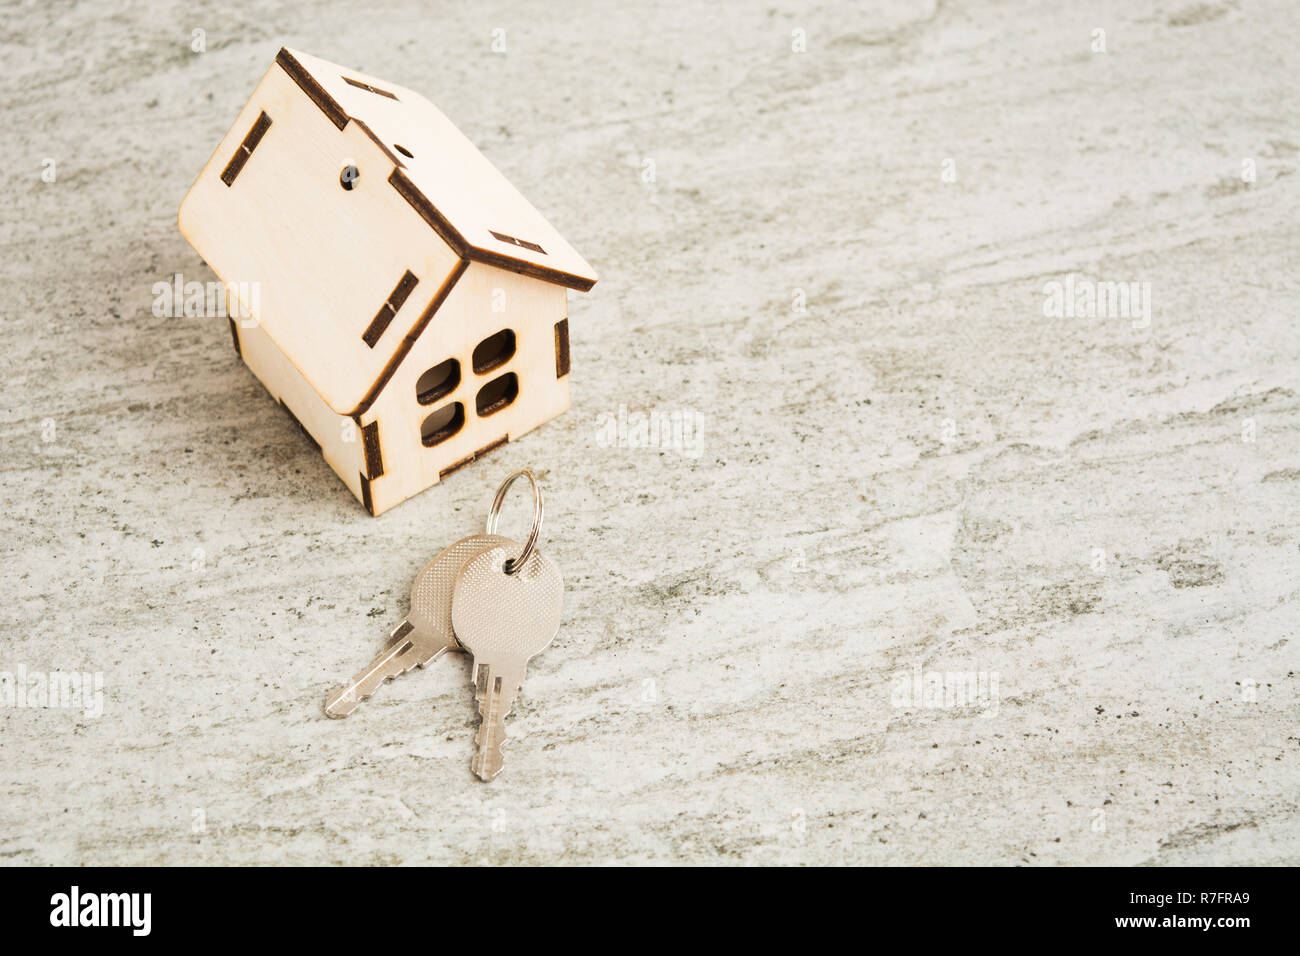 Small toy wooden house with keys on grey stone background with copy space Stock Photo